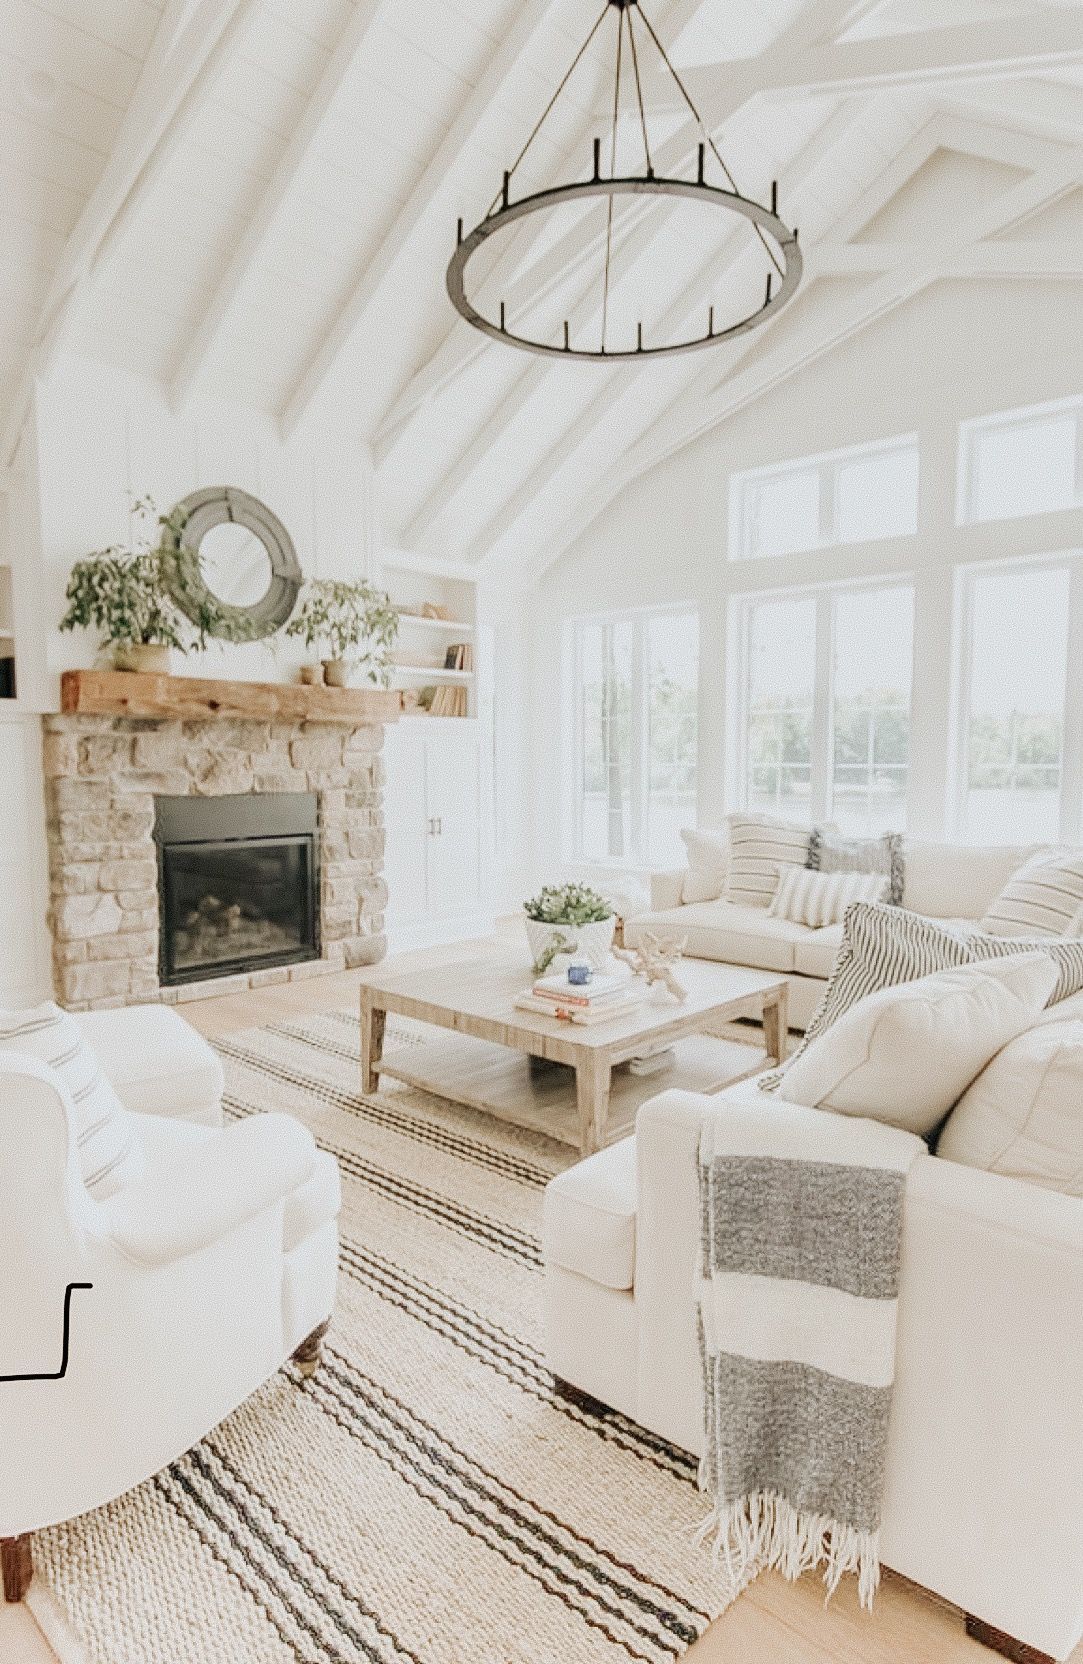 An Interesting Farmhouse Living Room with Large Window